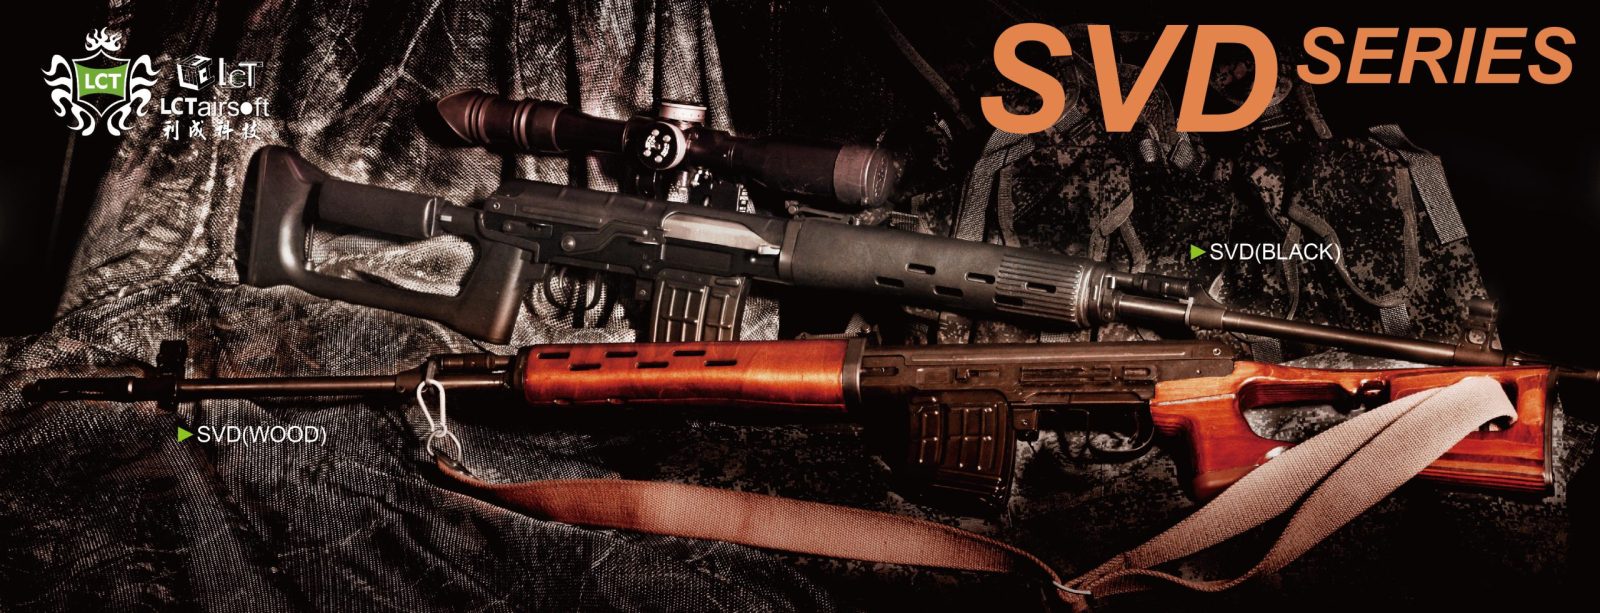 IWI announces the new 7.62X51mm Ace Sniper S.A Rifle